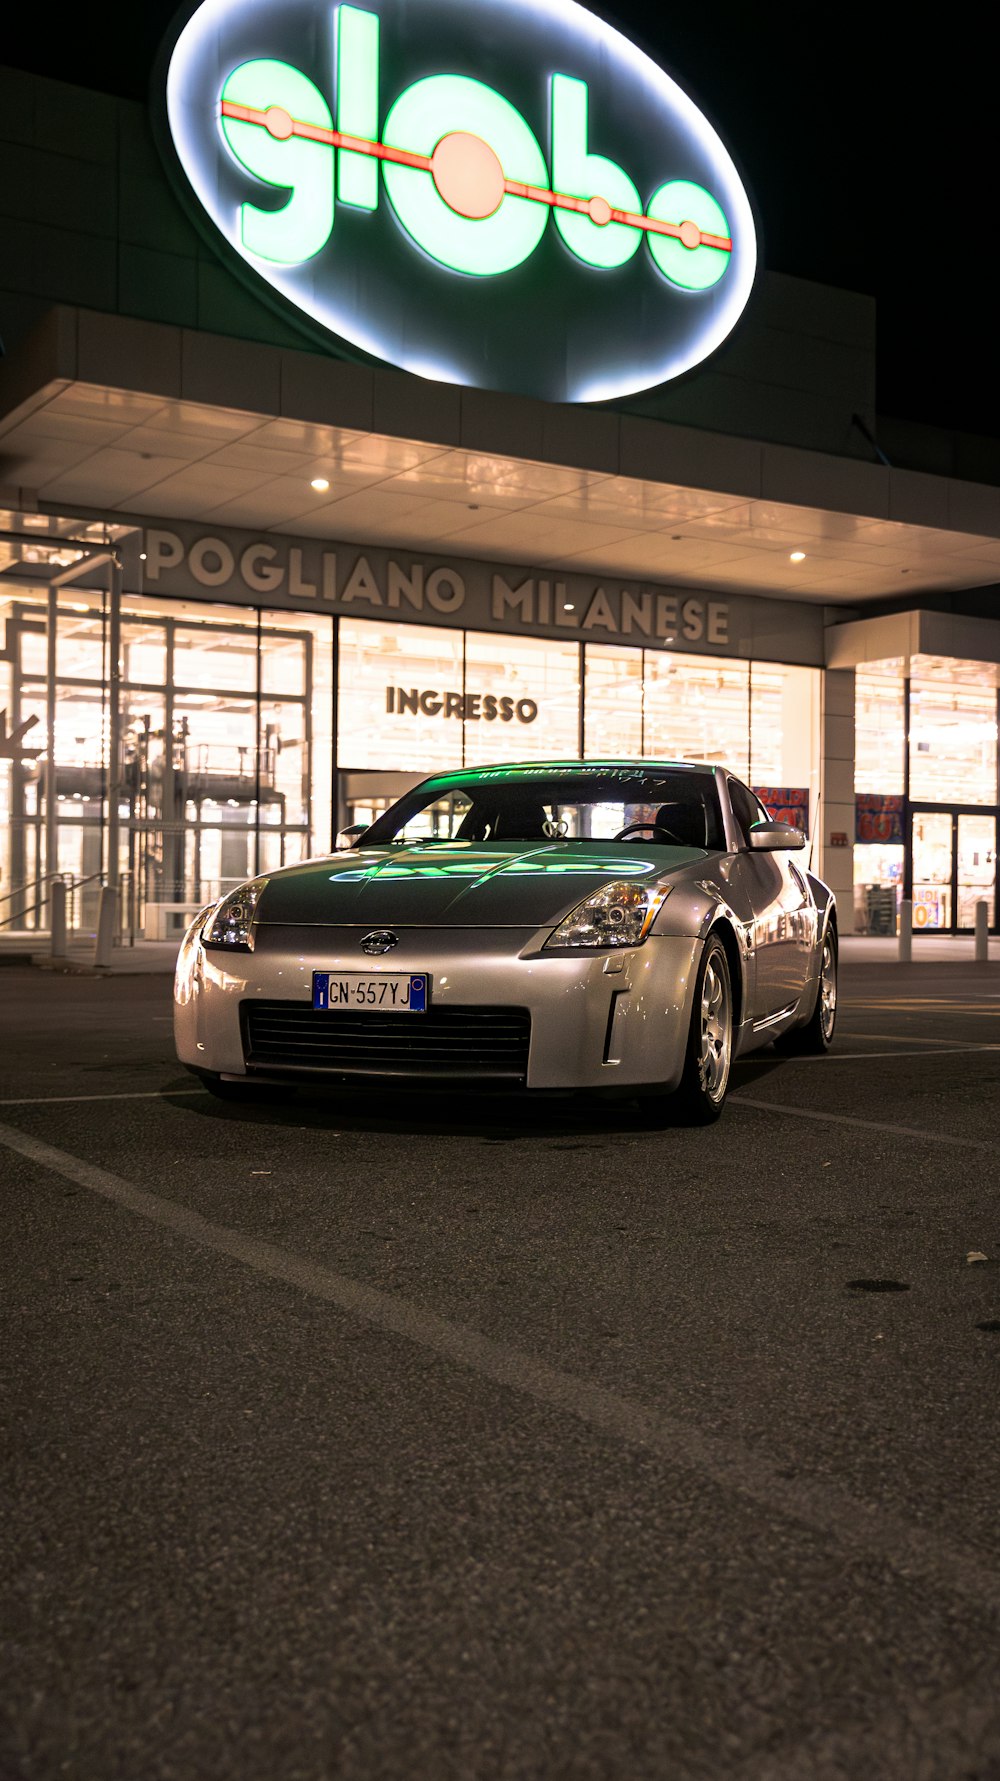 a silver sports car parked in front of a store